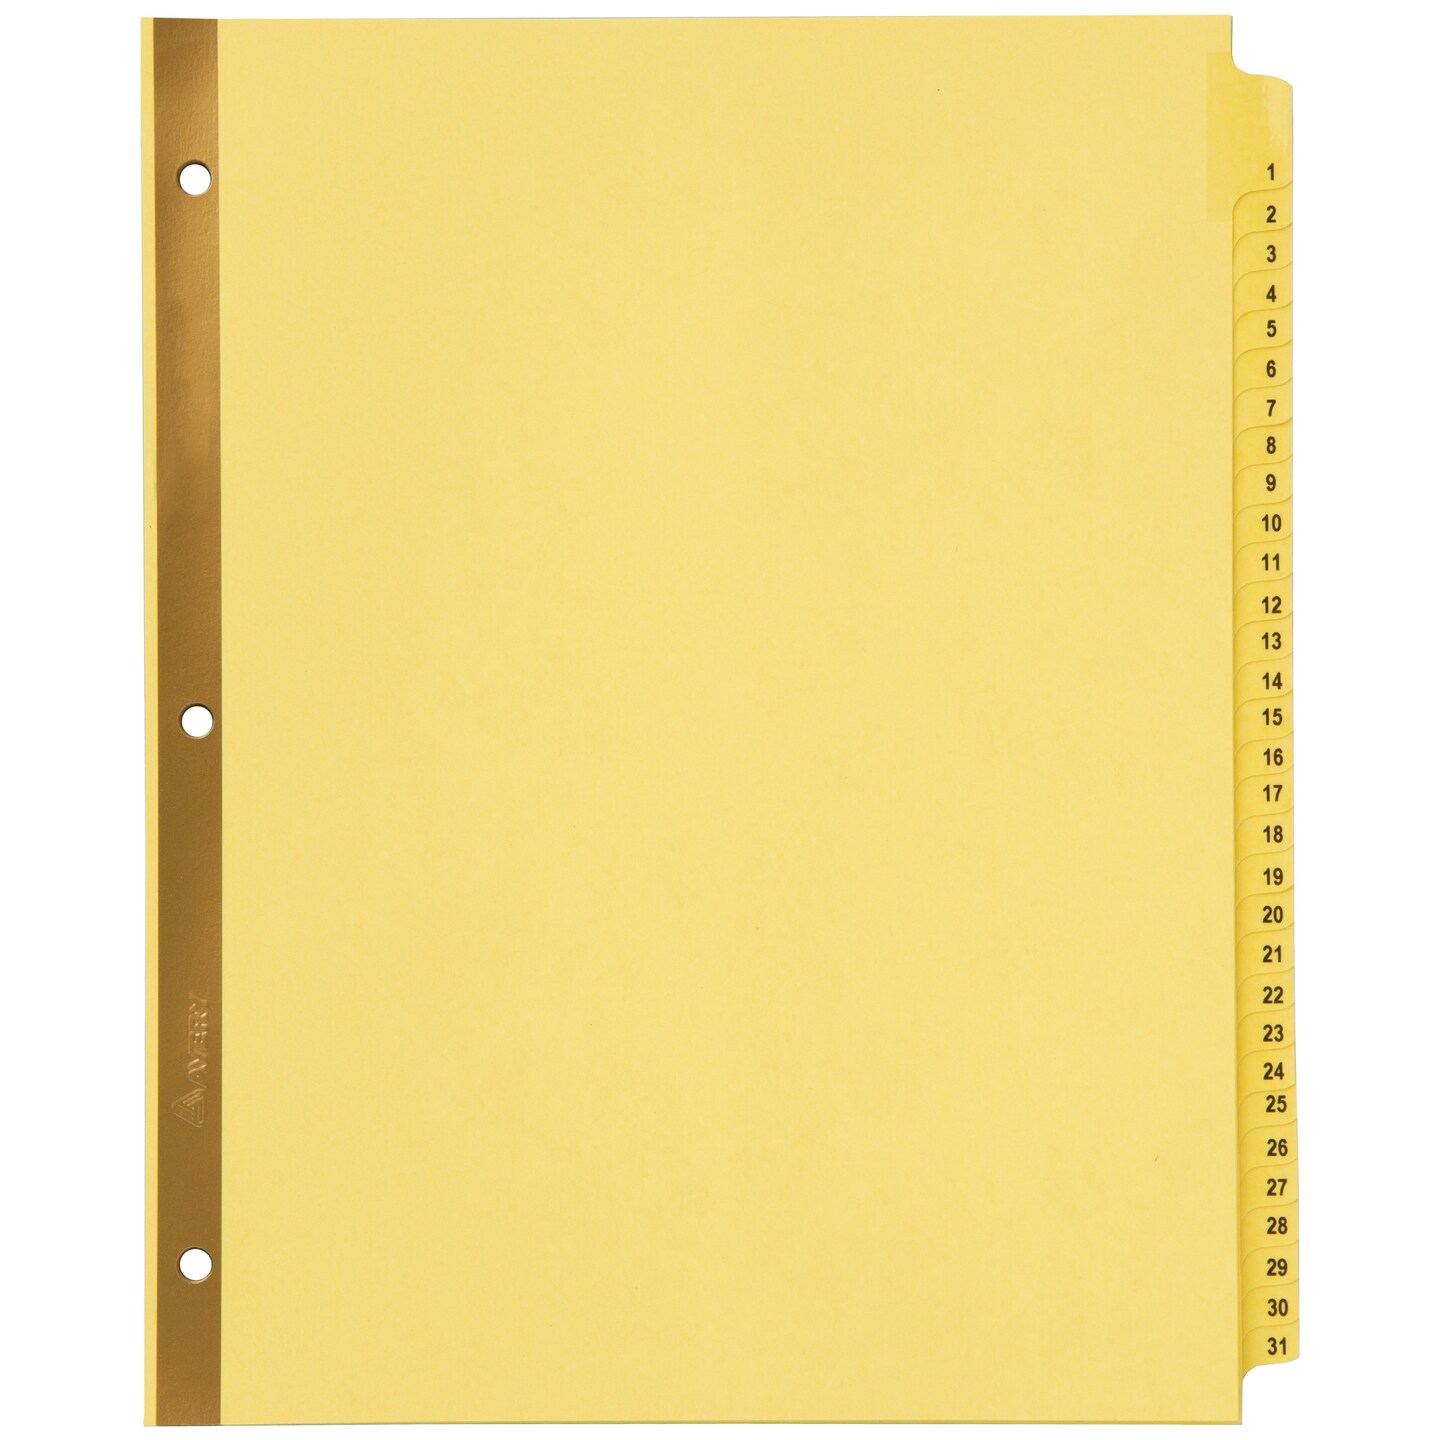 Avery Preprinted Laminated Tab Dividers, Gold Reinforced Binding Edge, 1-31 Tabs, 1 Set (11308)